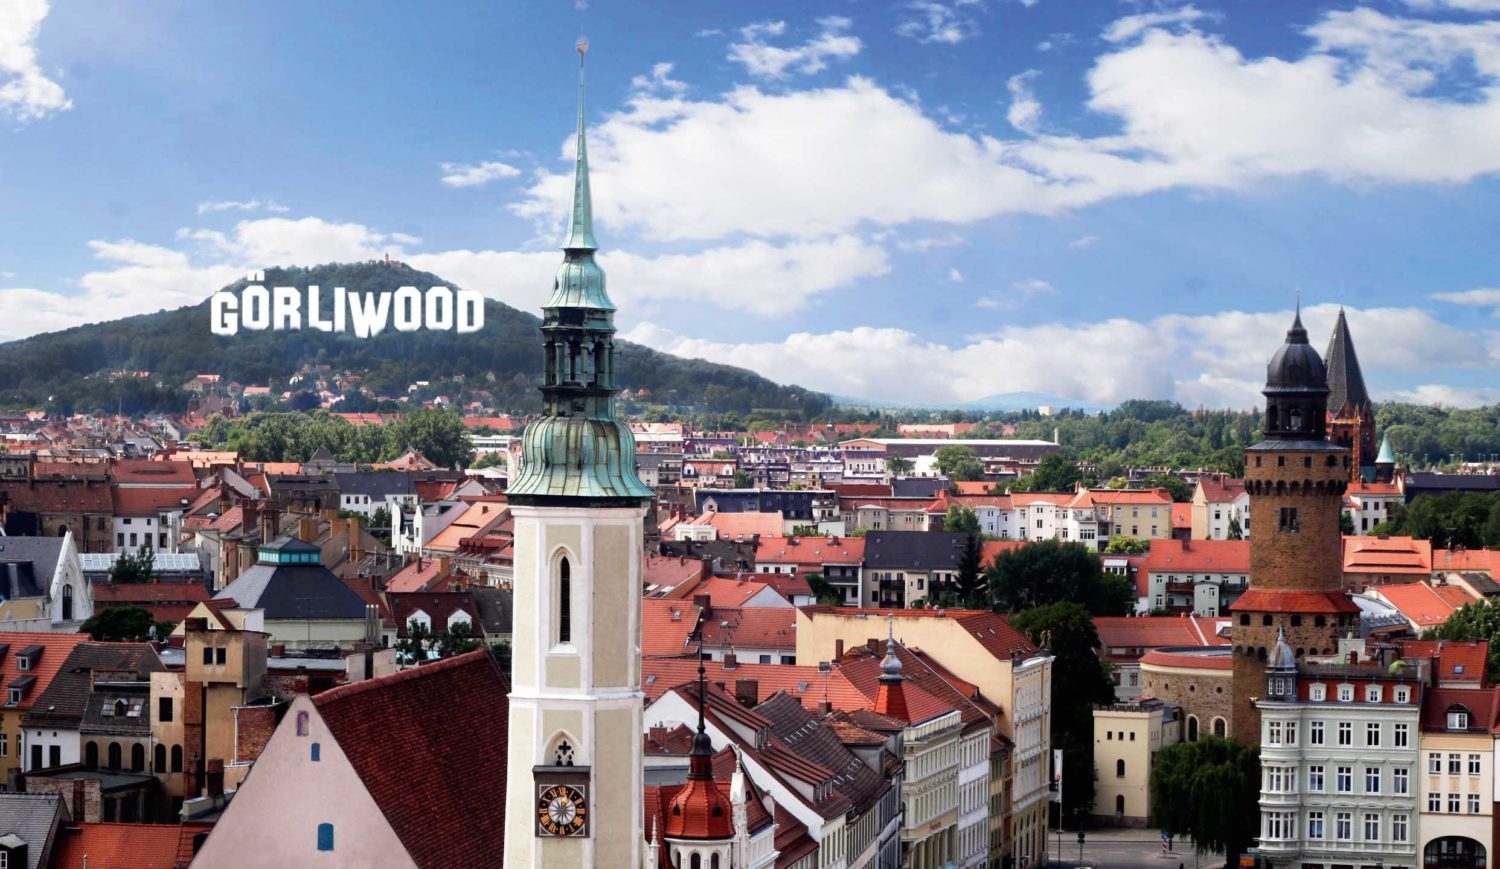 Hollywood, no thanks - we're here in Görliwood © The Partners